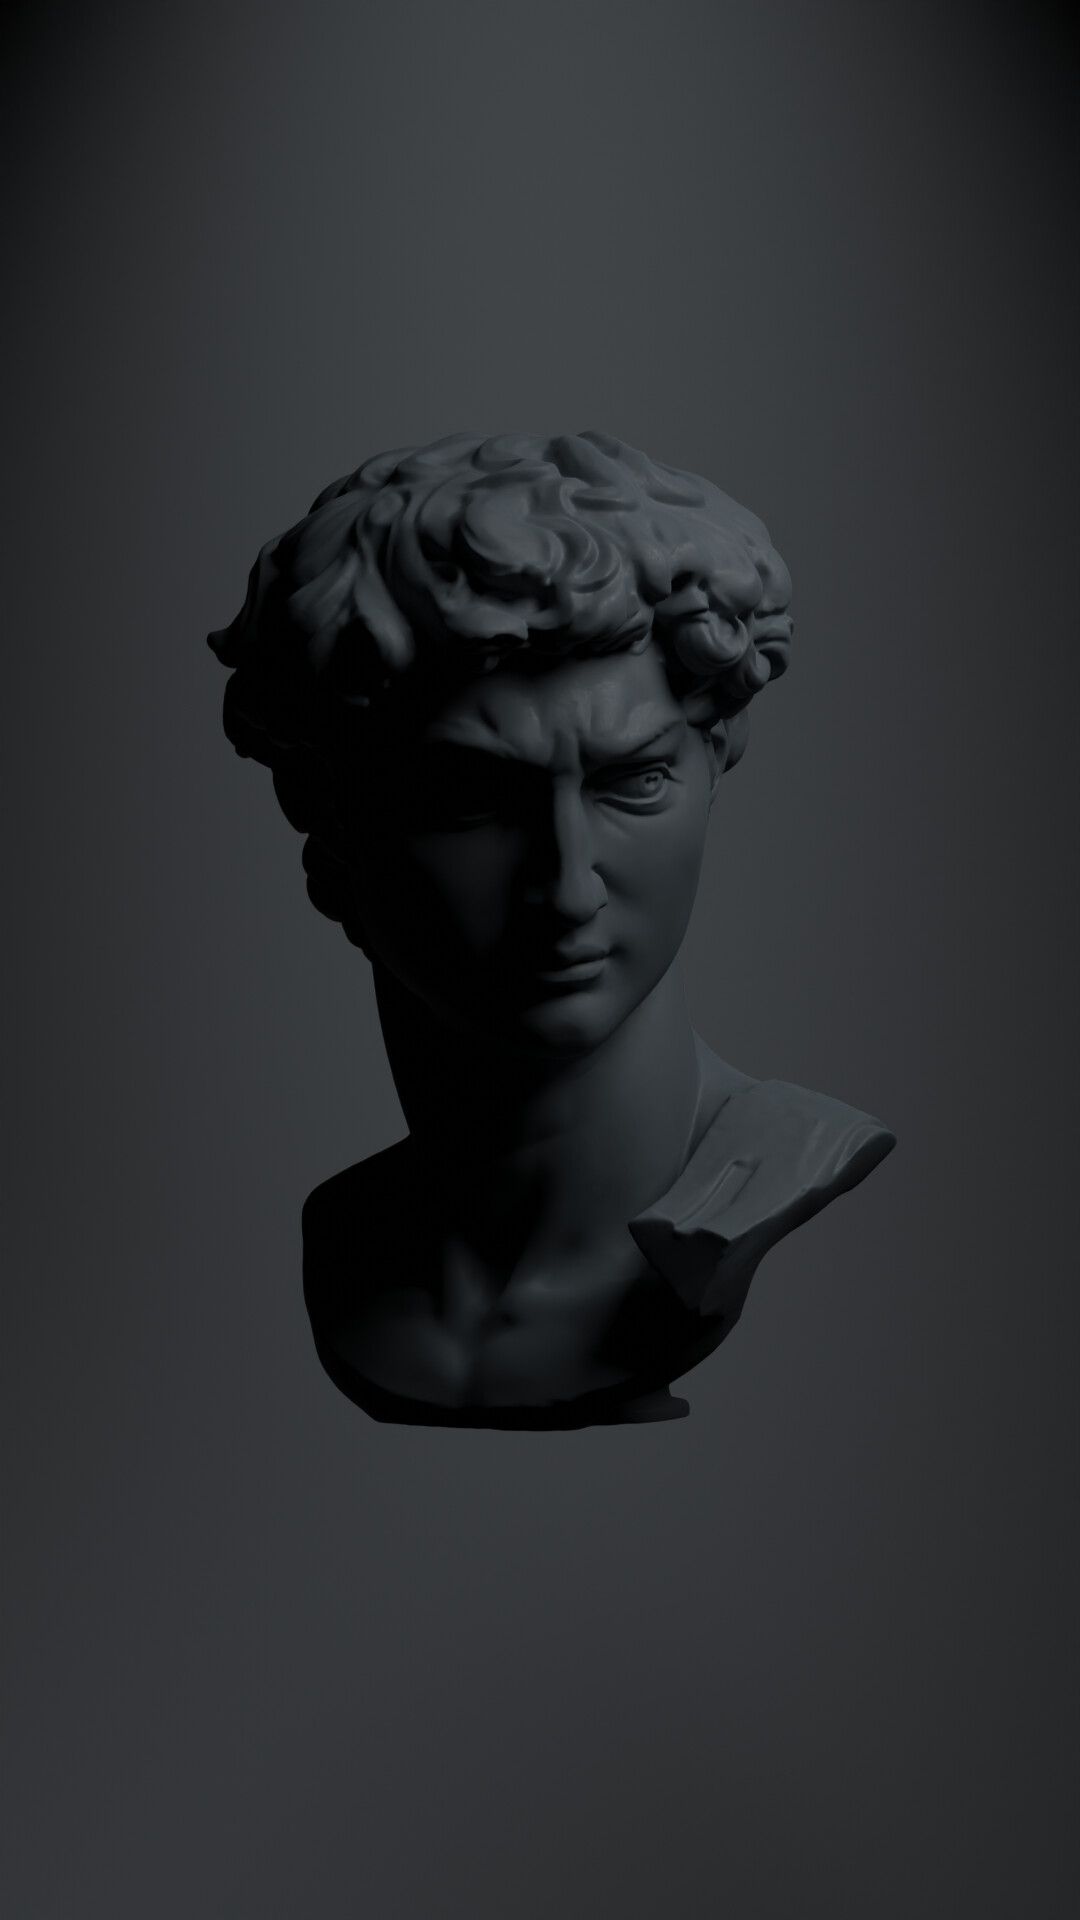 Greek Statue Aesthetic Wallpapers · 200+ Images 🗿💪🇬🇷🏛️